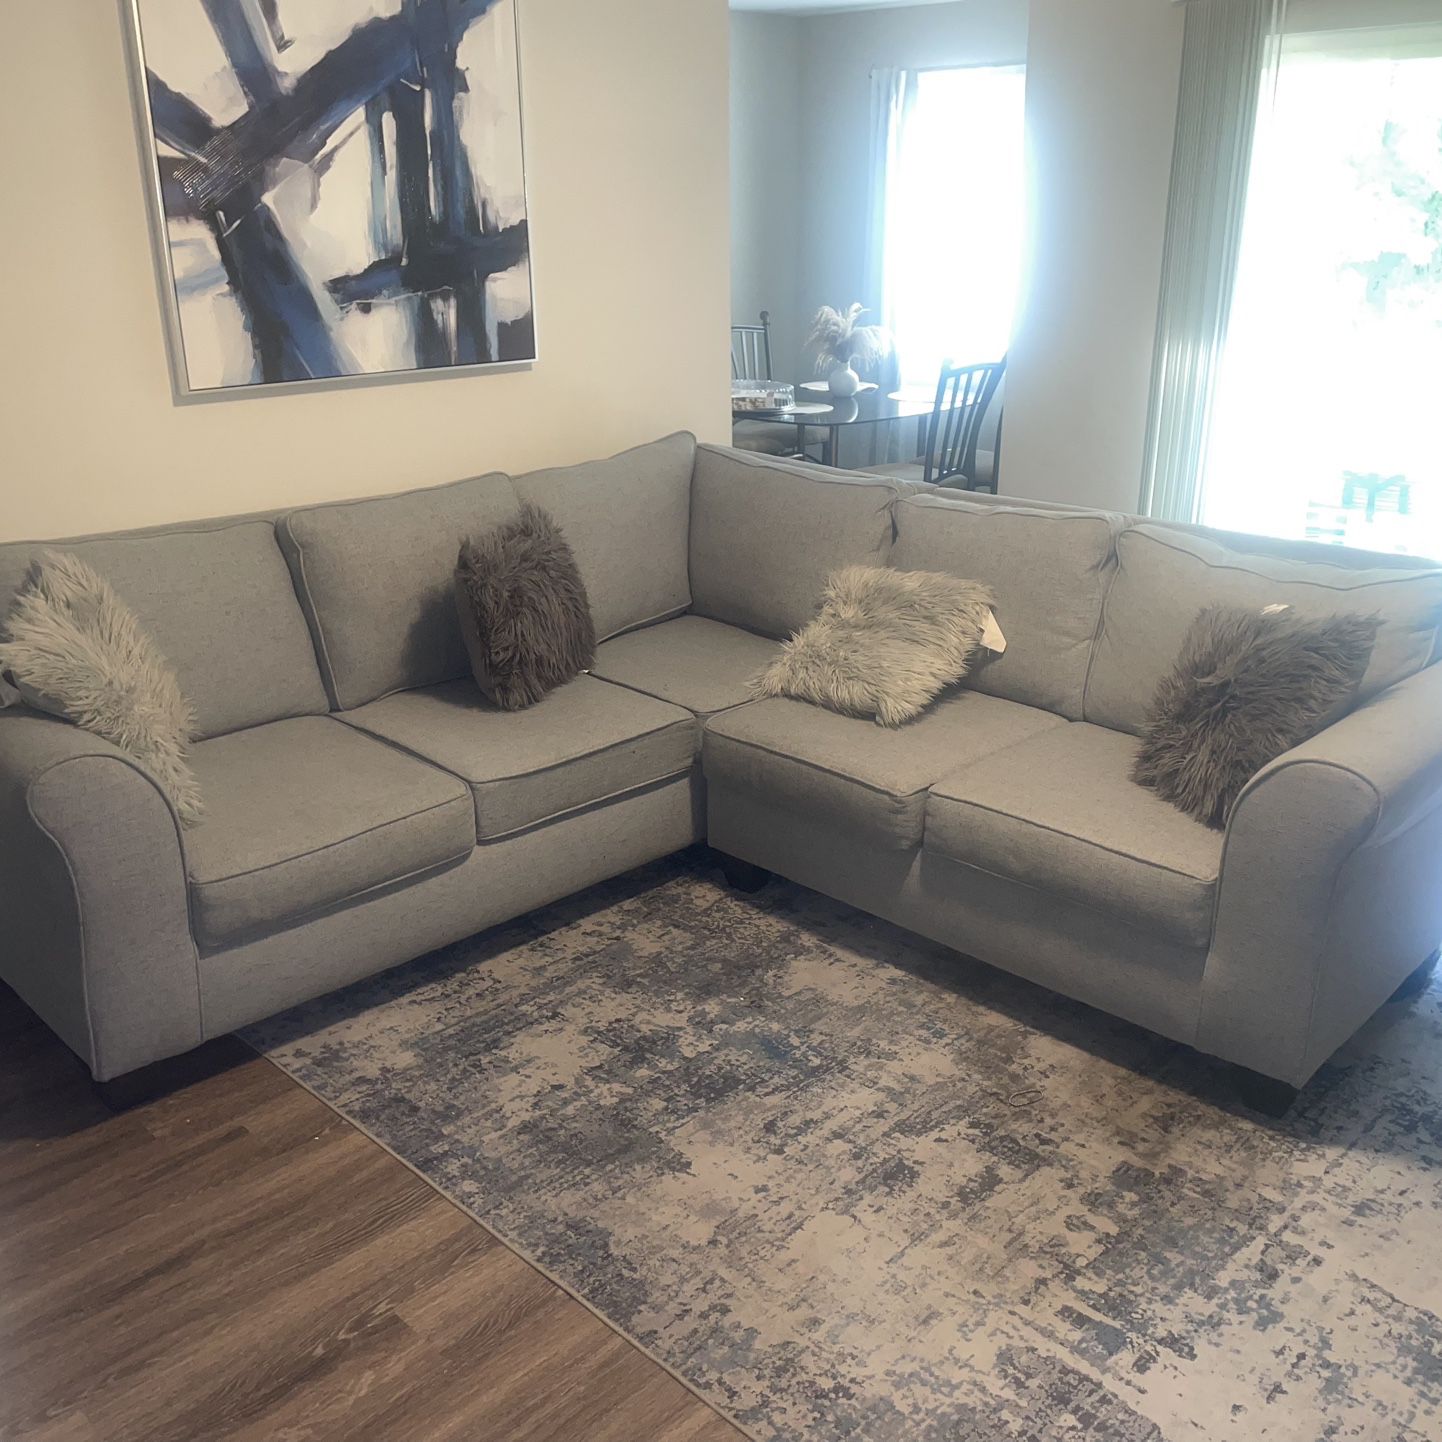 BEST OFFER! Blue Grey lush Sectional Ready For Pick Up In ATL! 